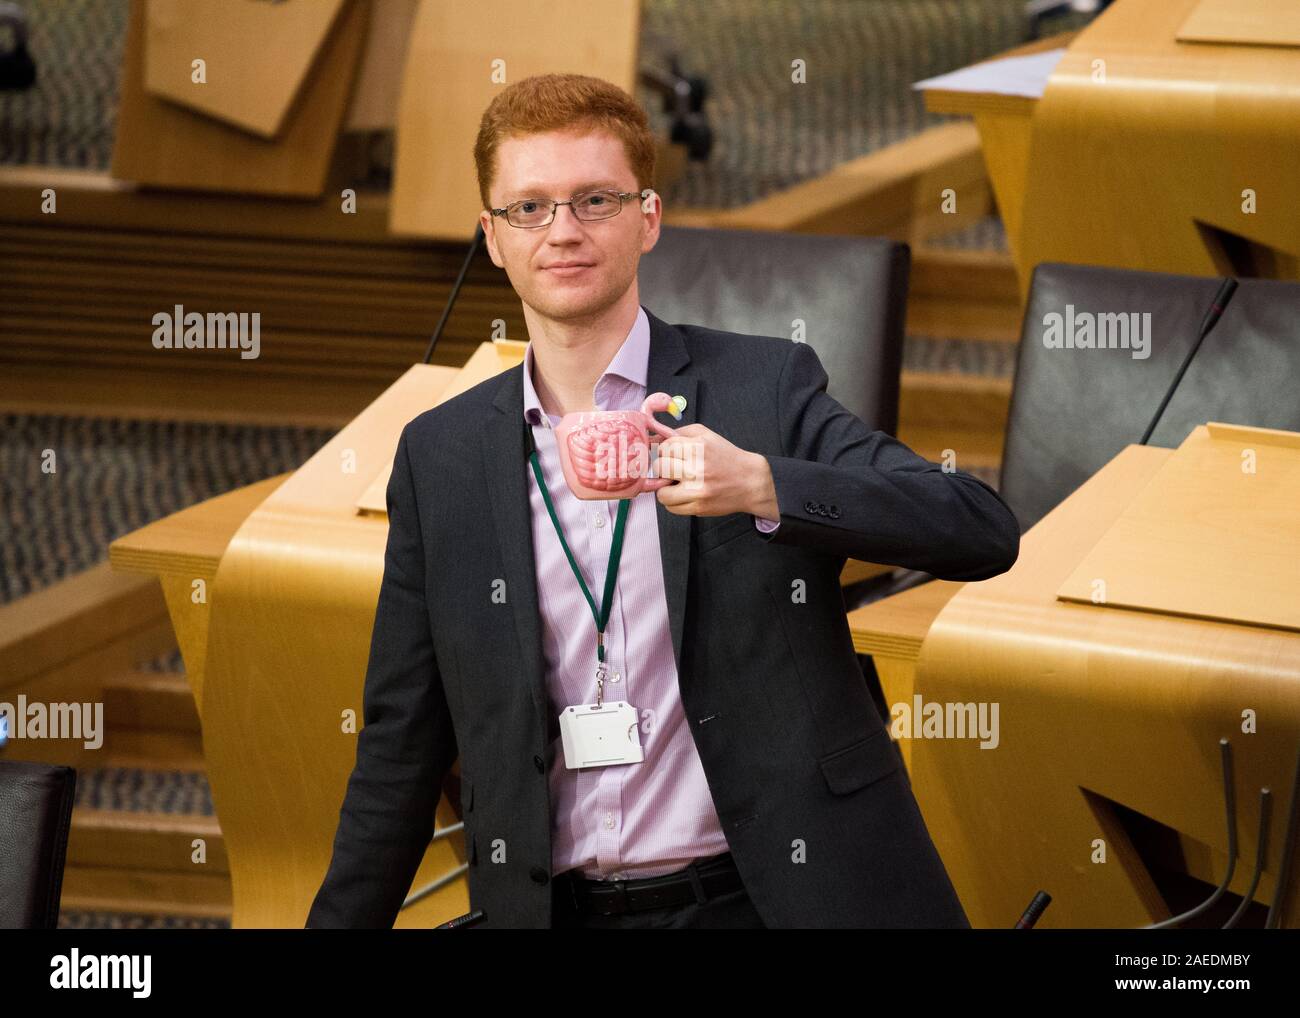 Edinburgh, UK. 7 November 2019. Pictured: Ross Greer MSP, Scottish green Party, holding a flamingo shaped mug of tea. The Scottish Green Party have halted the proposed development of Flamingo Land at Loch Lomond. Credit: Colin Fisher/Alamy Live news. Stock Photo